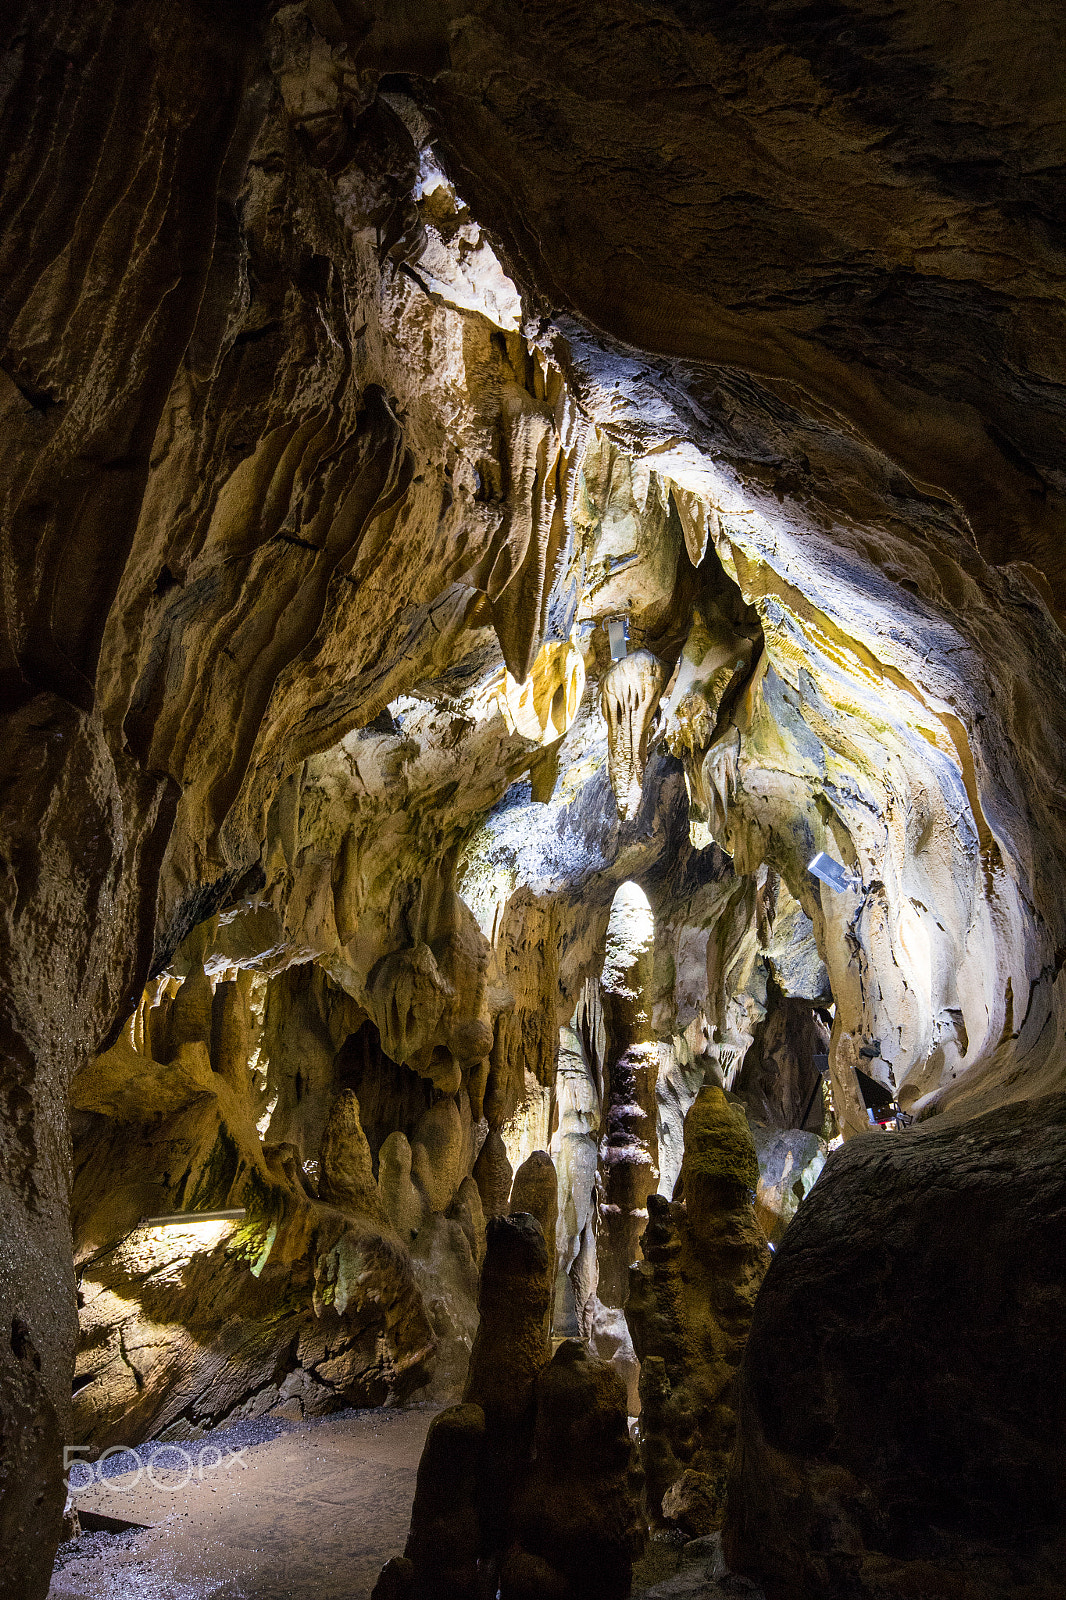 Pentax K-S2 sample photo. Impression from the stalactite cave no. 7 - the chaos photography